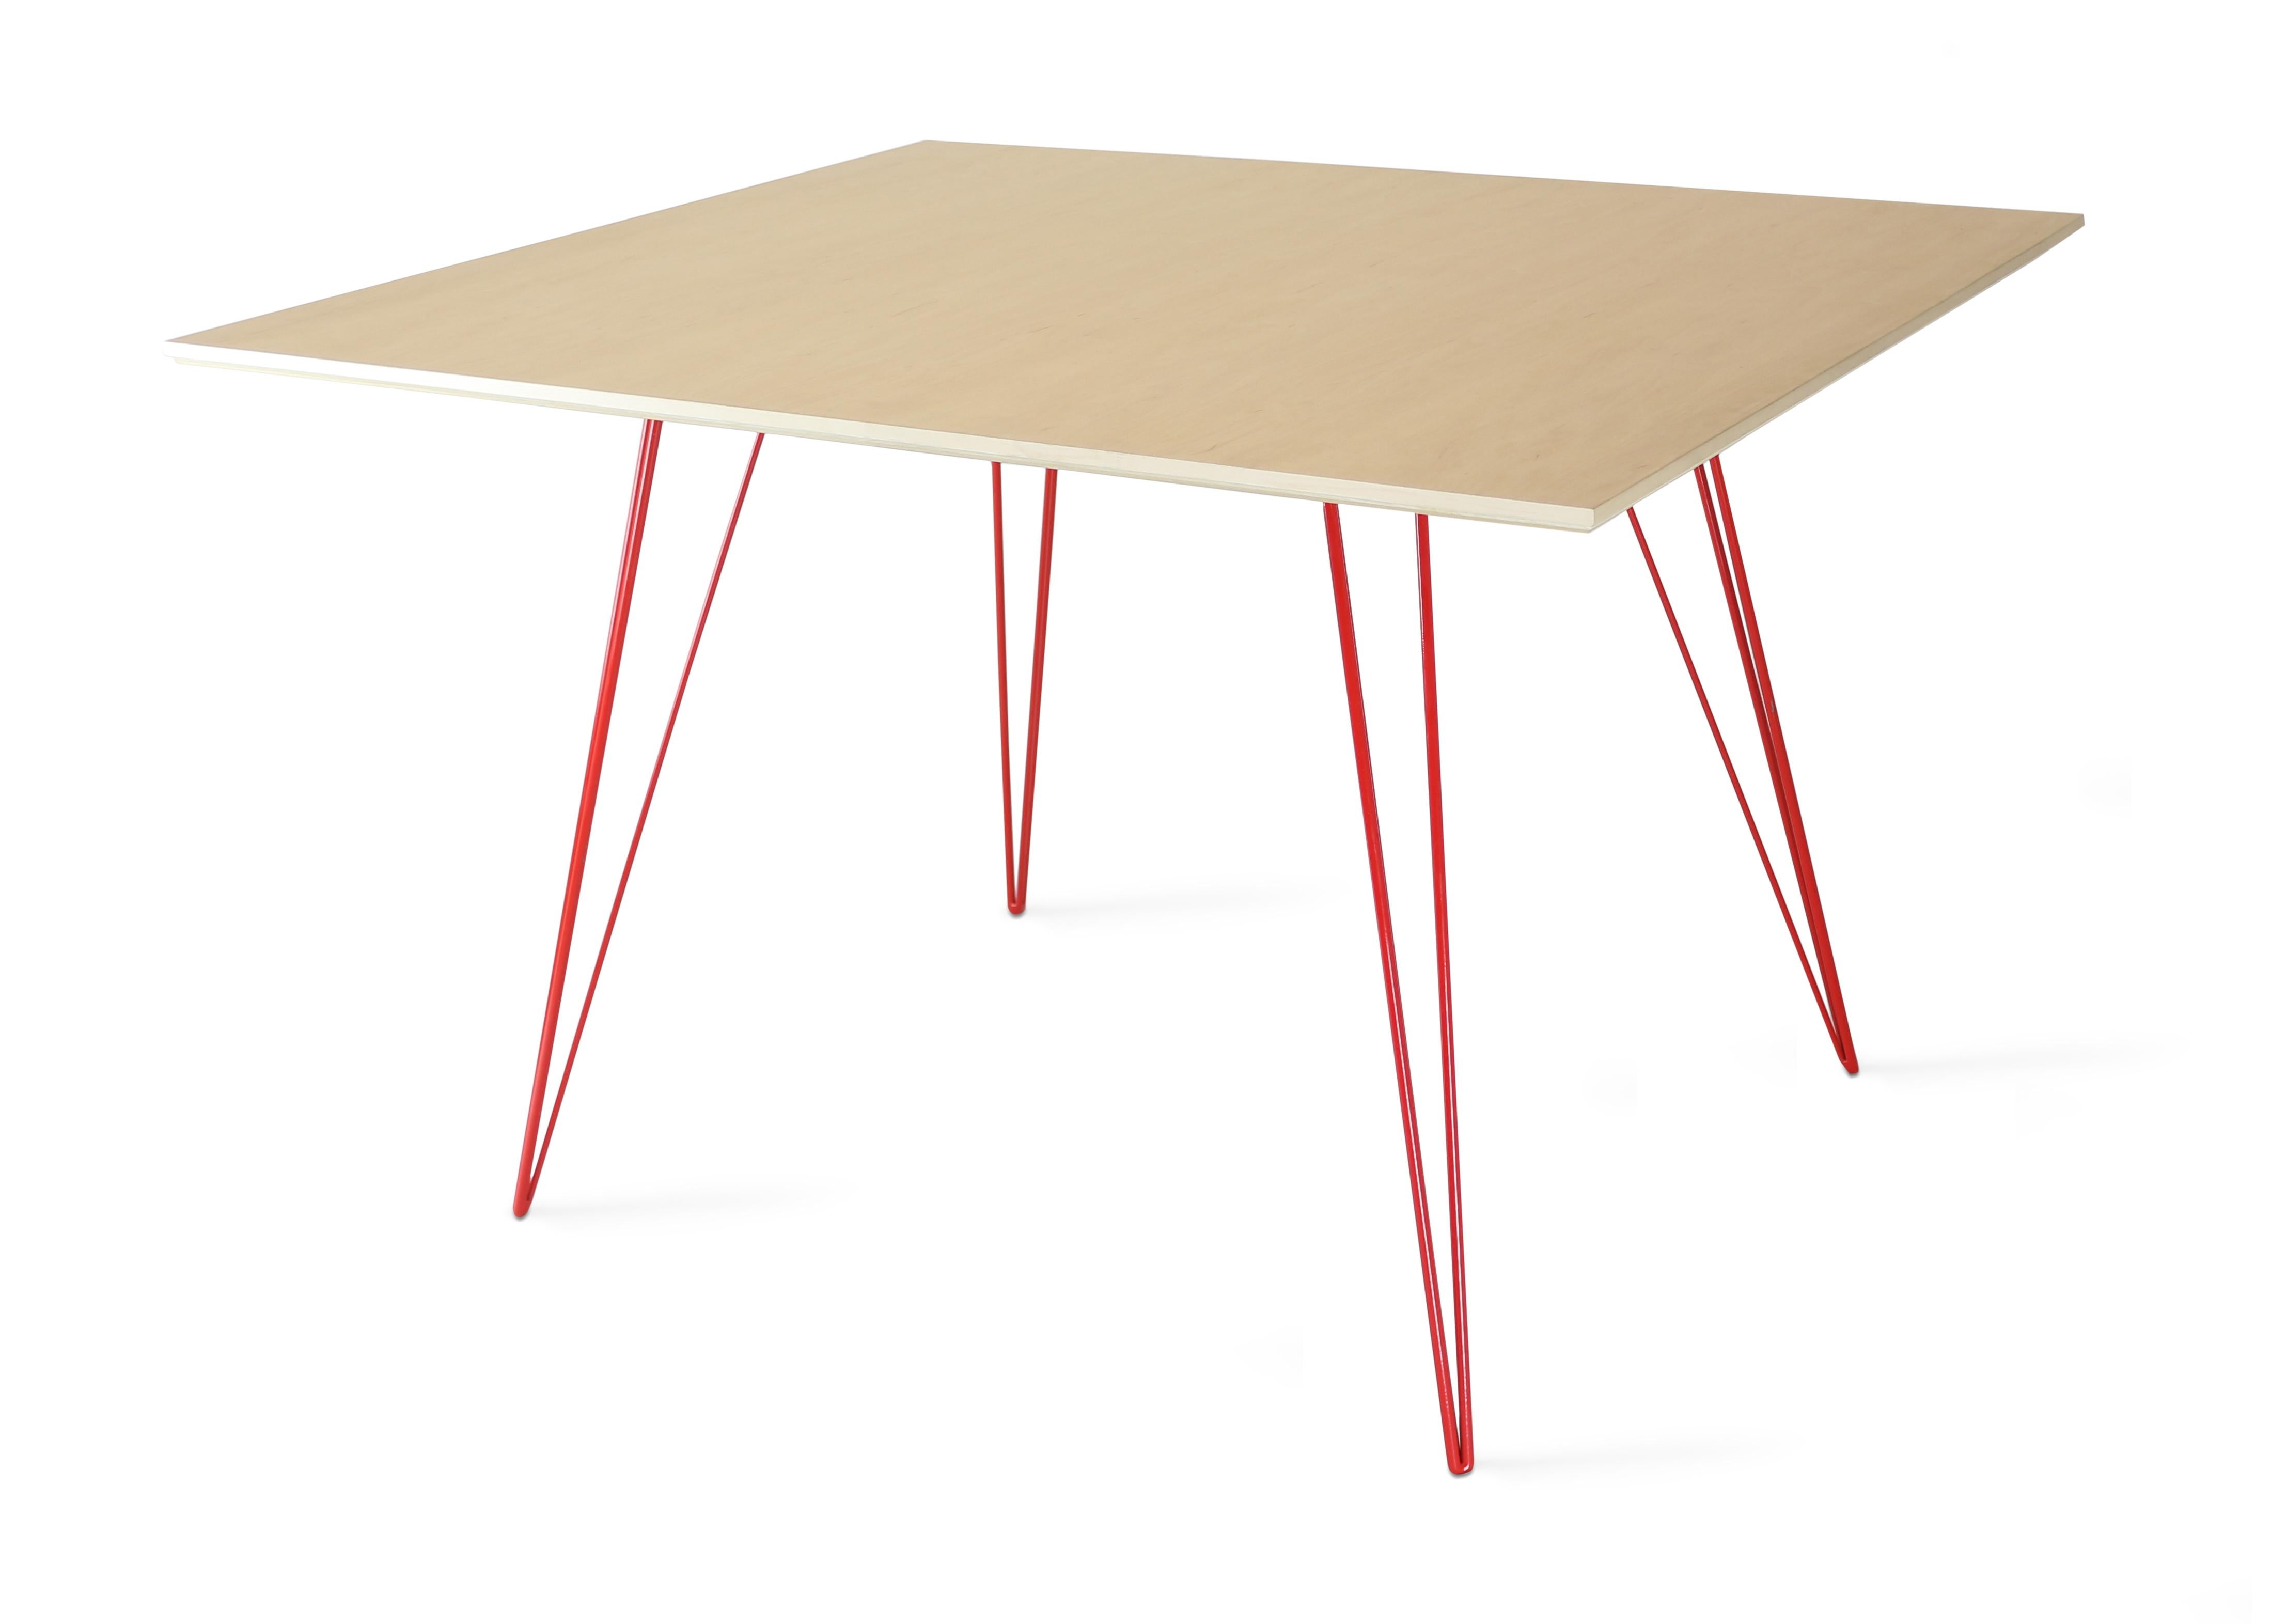 A thin, elegant and light Maple table that can be customized to any shape, size and color desired. This handcrafted item perfectly blends industrial hairpin legs with a beveled wooden top. The irregular beauty of its natural wood combined with its